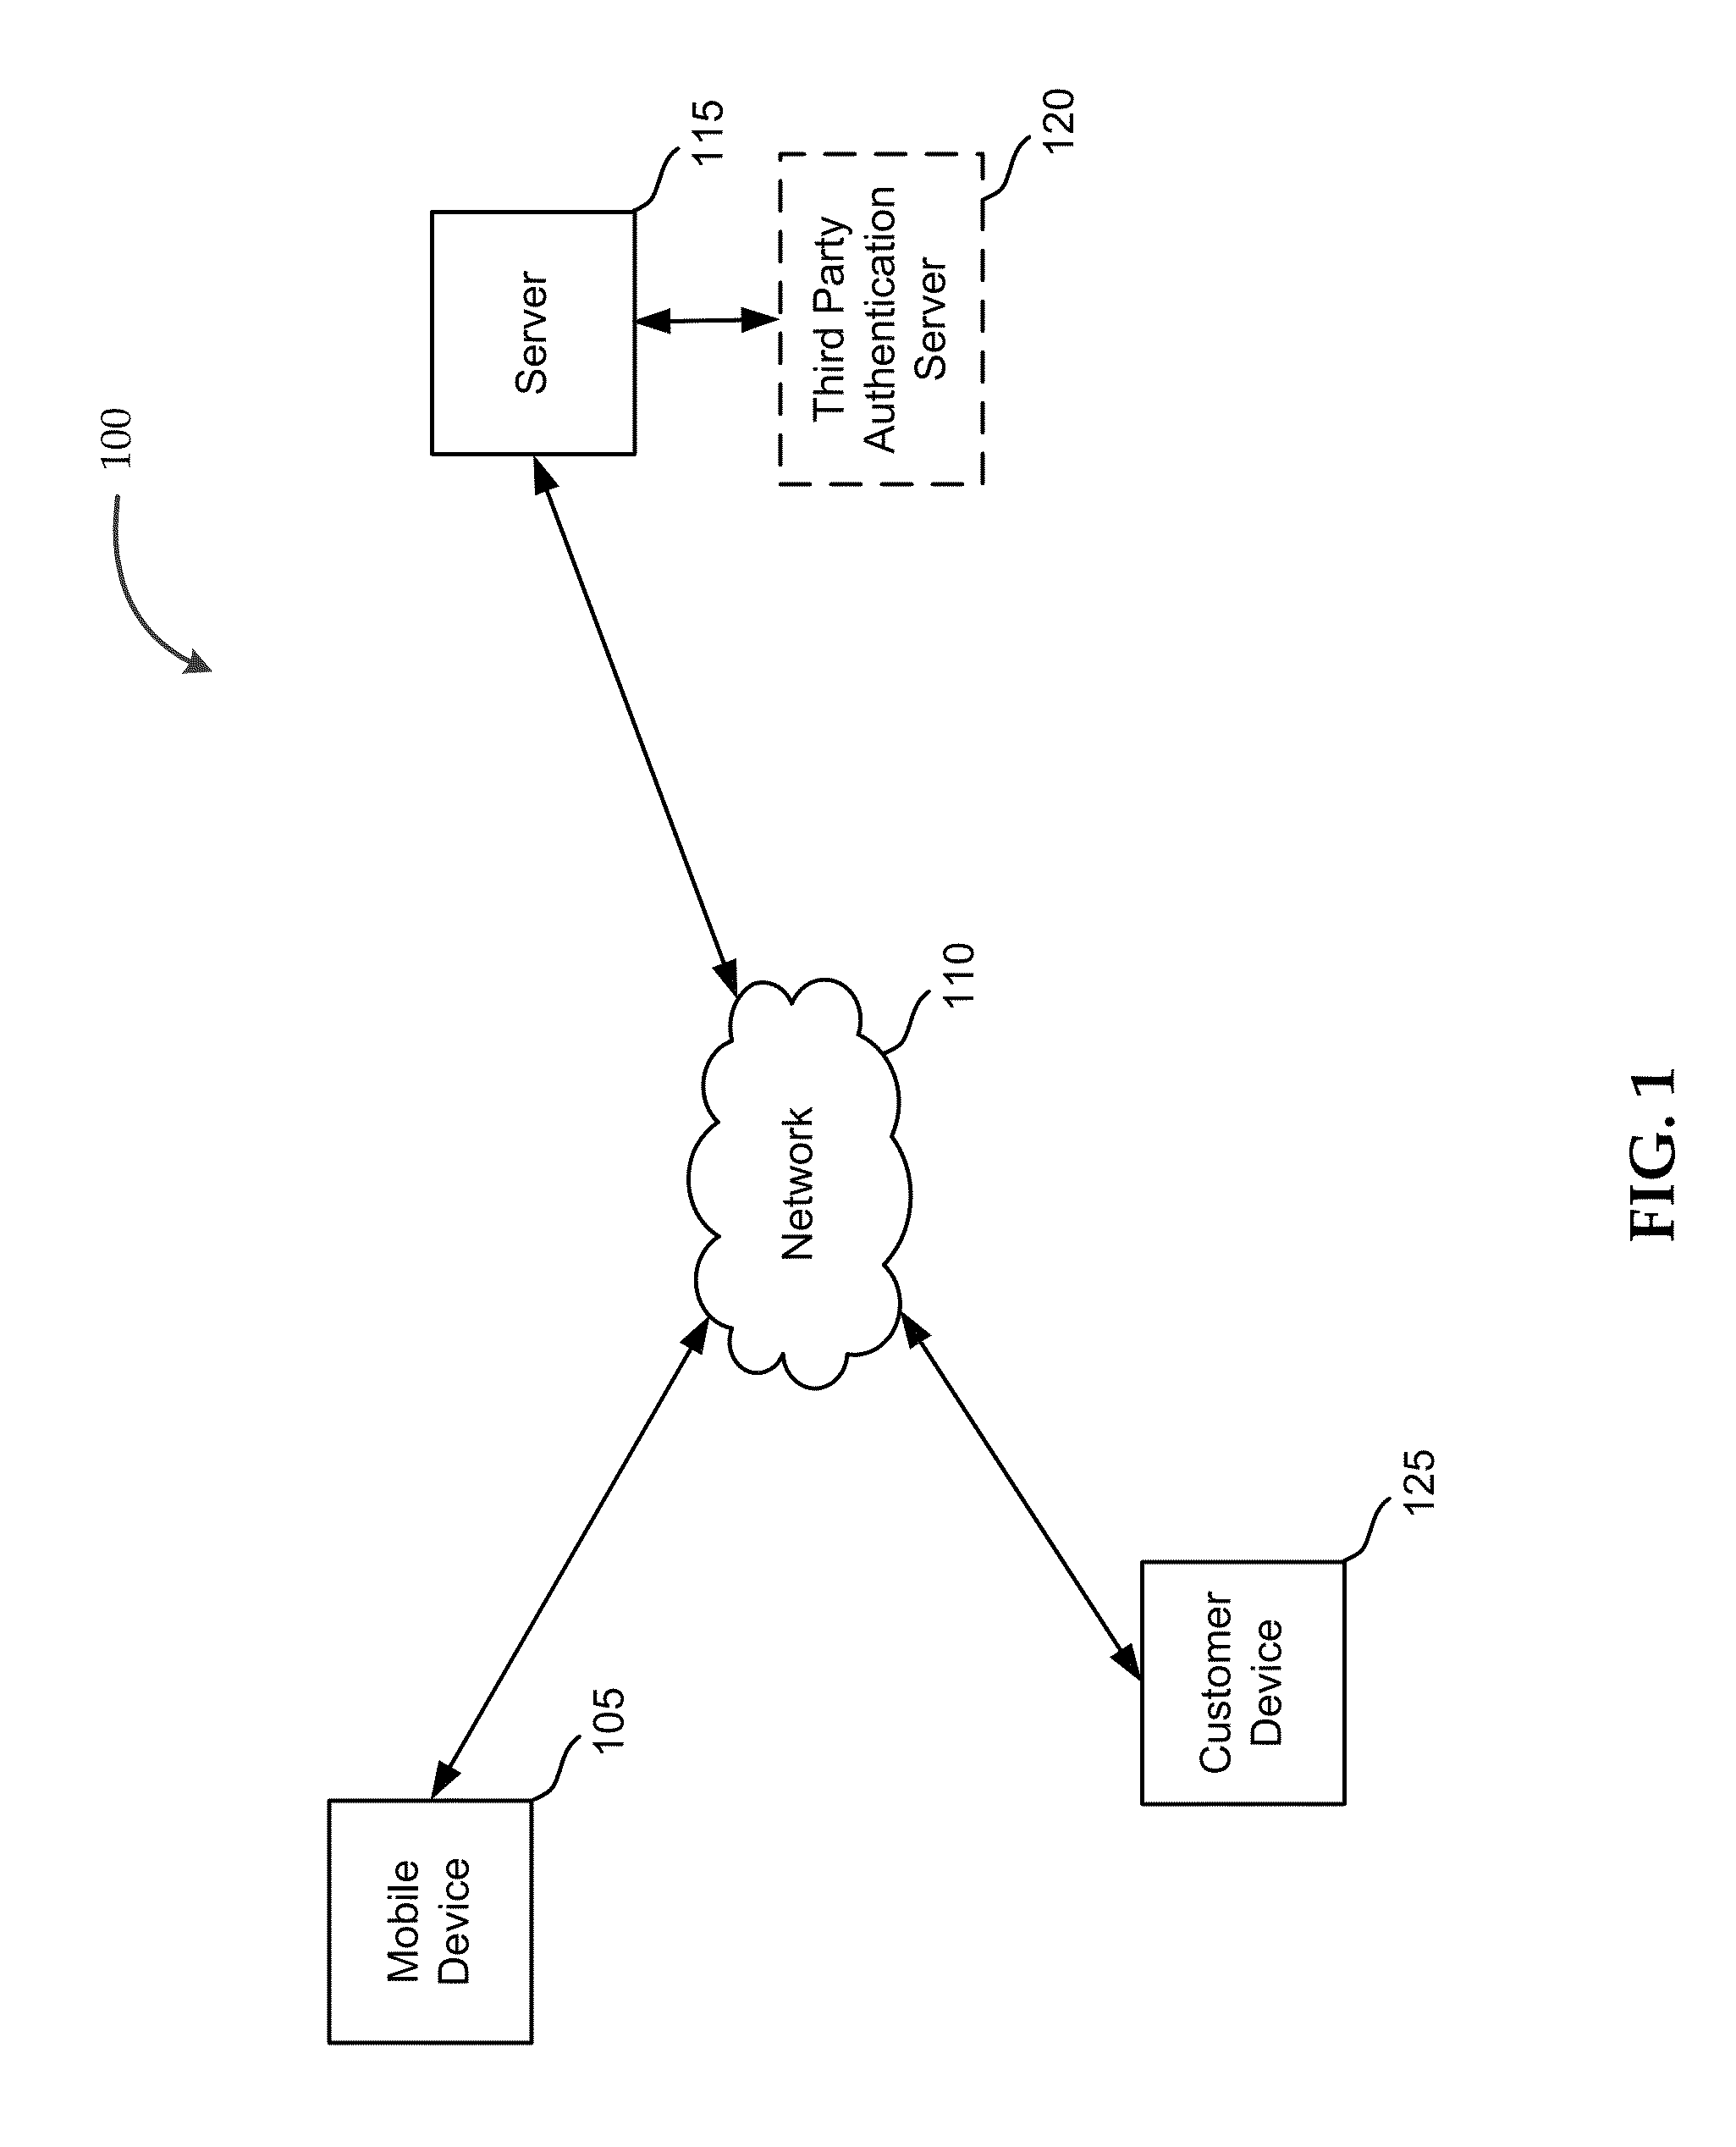 Method and System for Replaying a Voice Message and Displaying a Signed Digital Photograph Contemporaneously